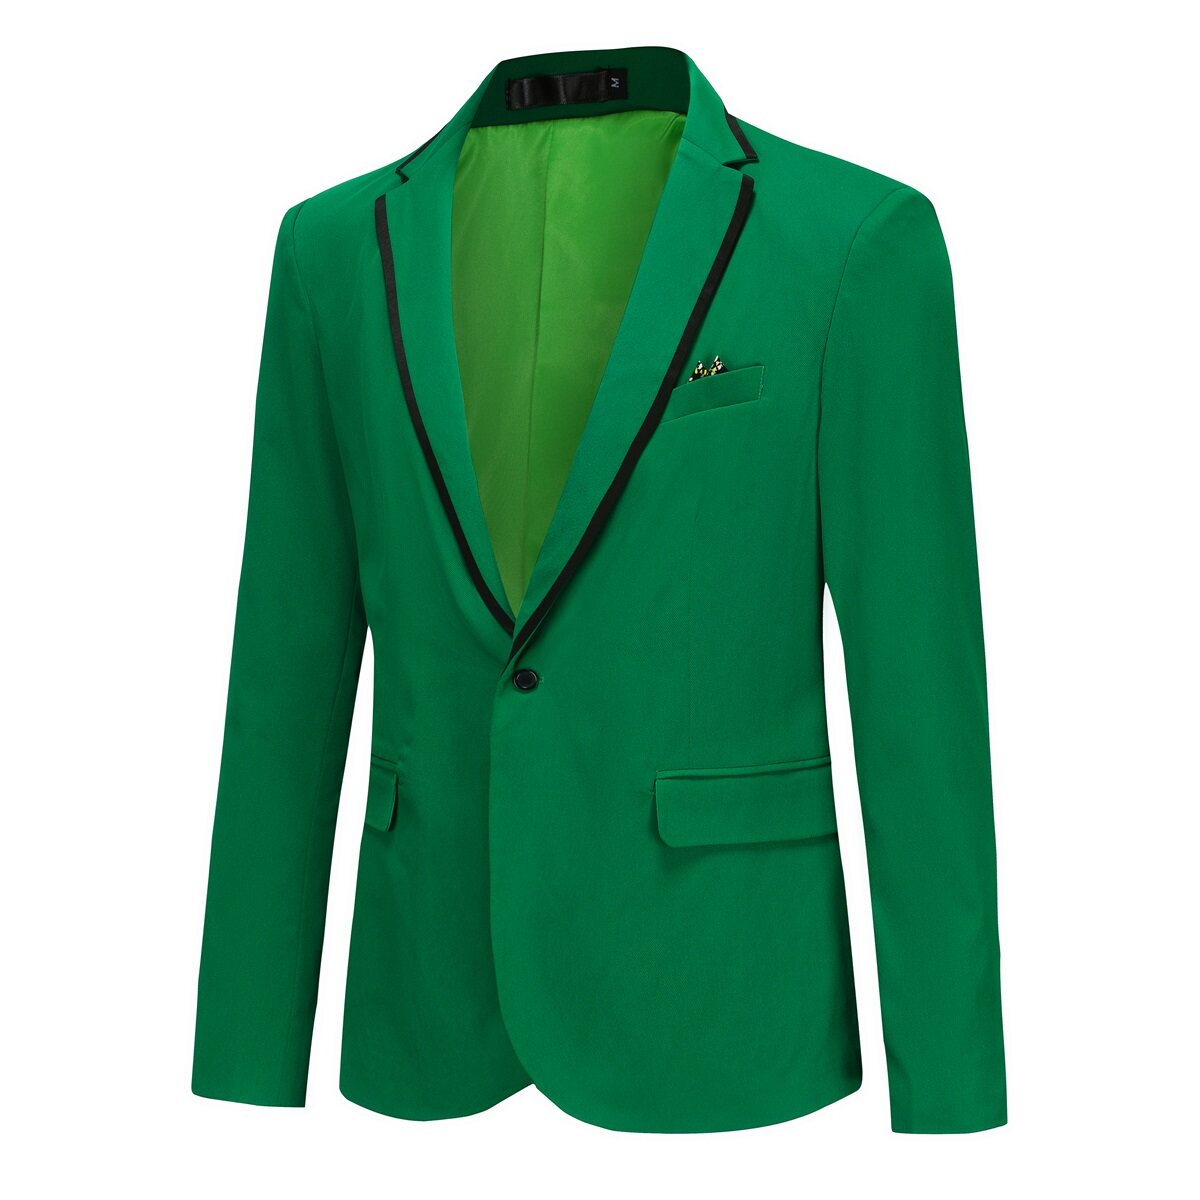 Men's One Button Solid Color Casual Blazer Green